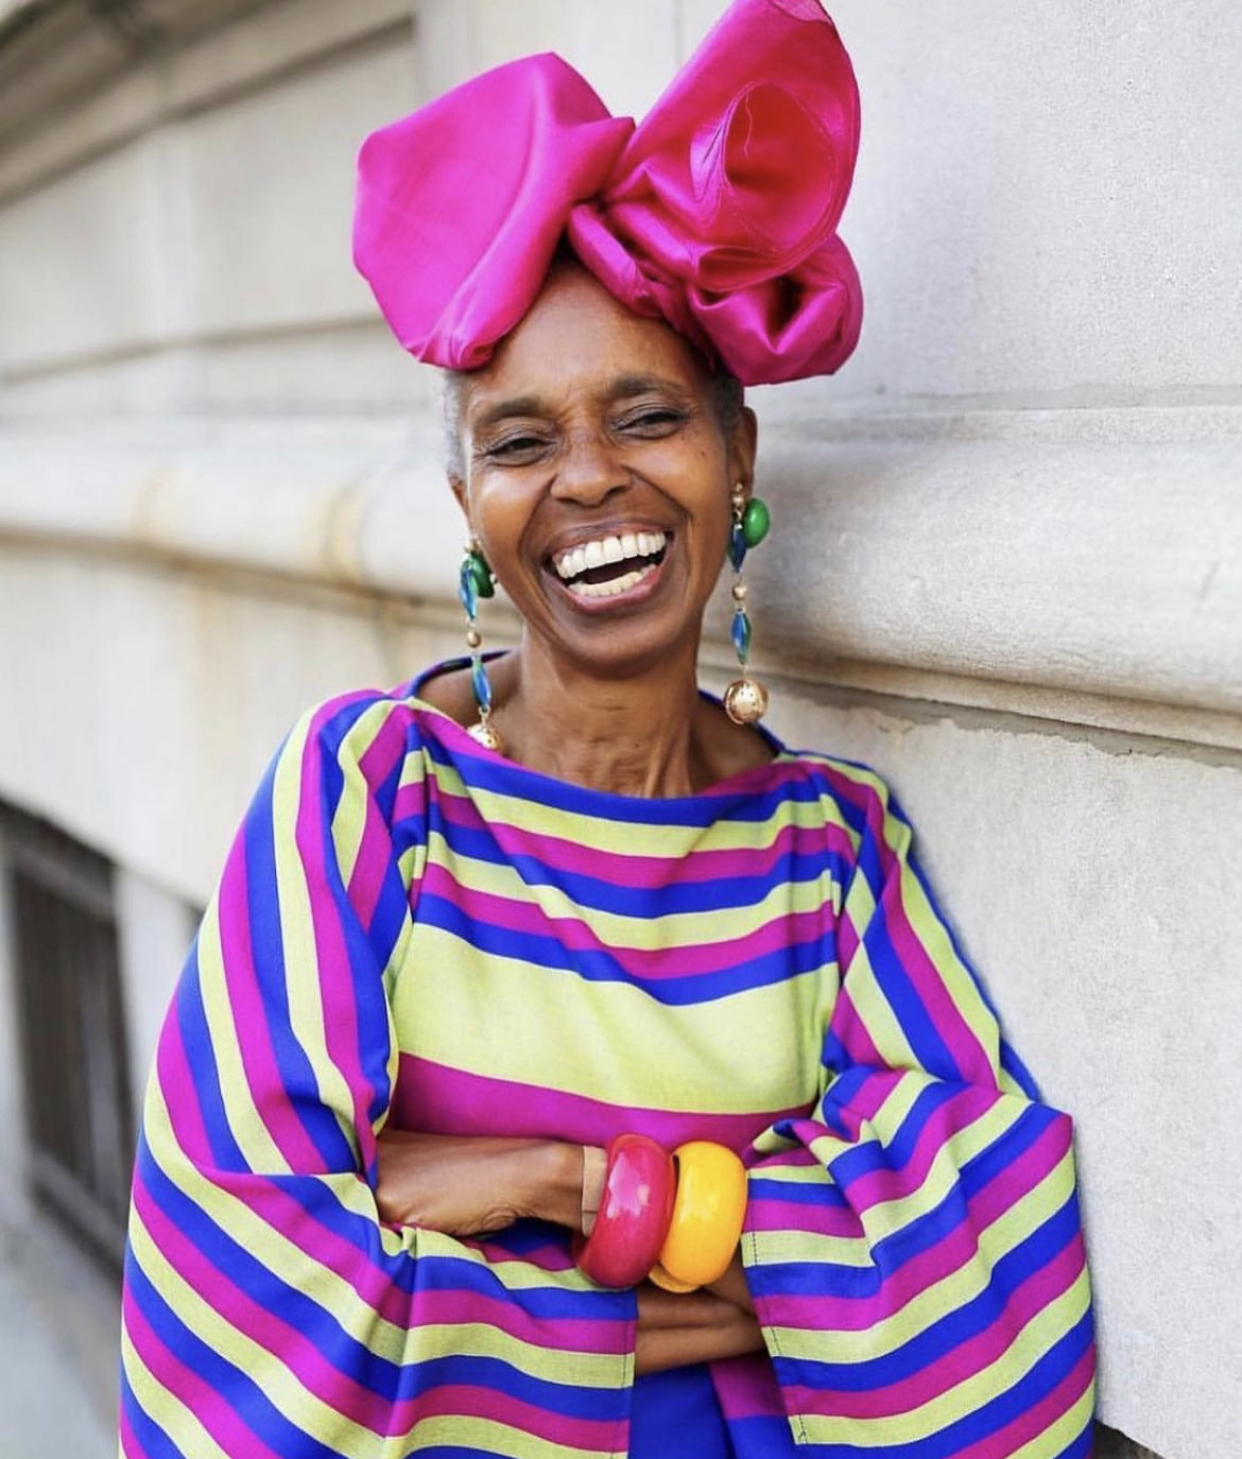 Woman wears colourful clothes as she smiles big